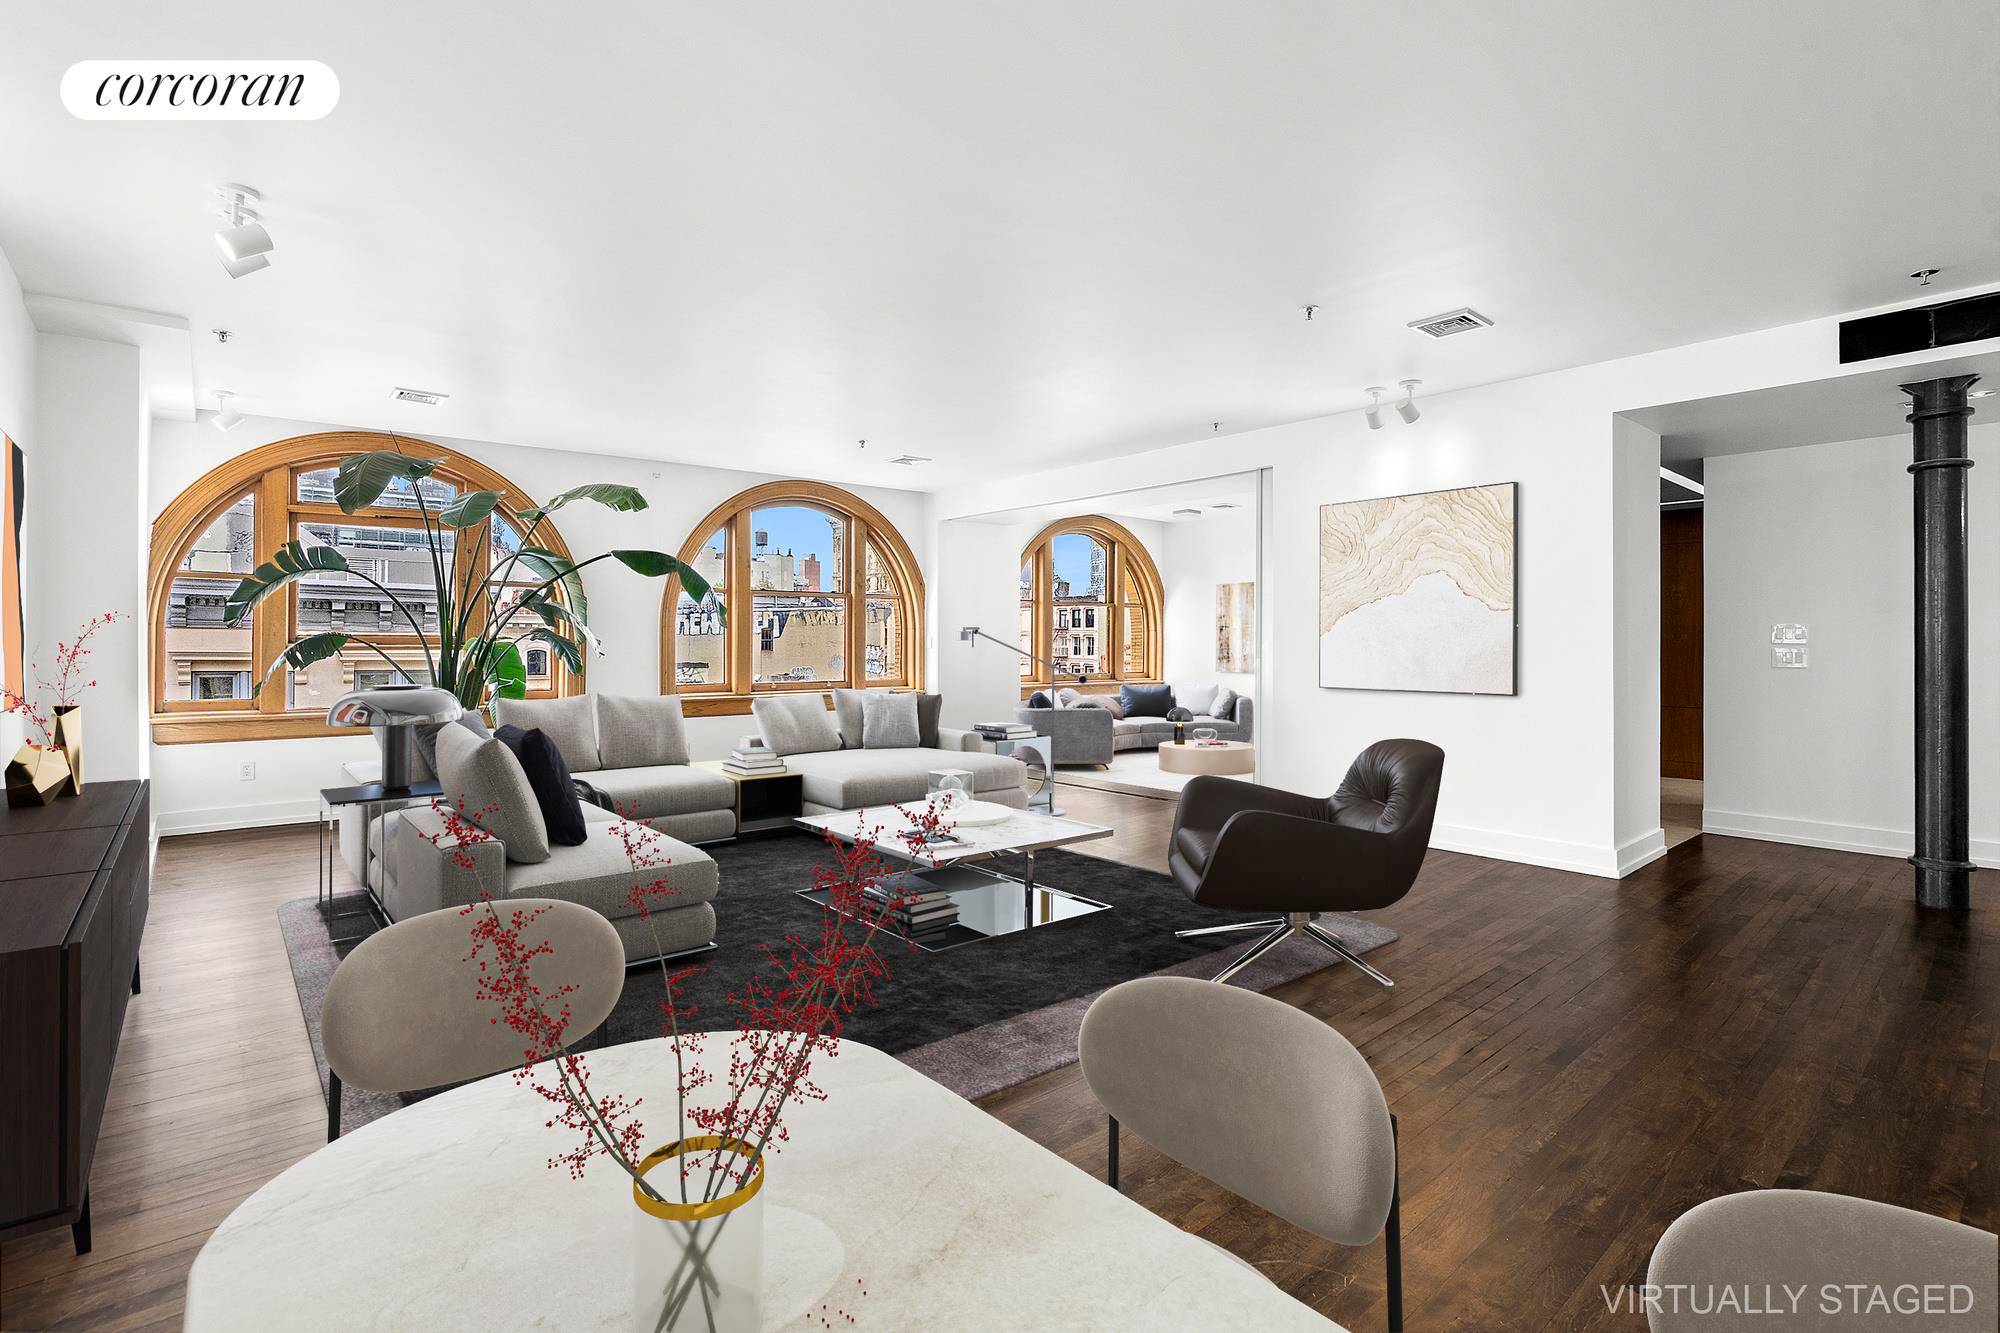 A full floor 4, 000 SF 372 SM traditional loft home with north, south, east and west exposures.